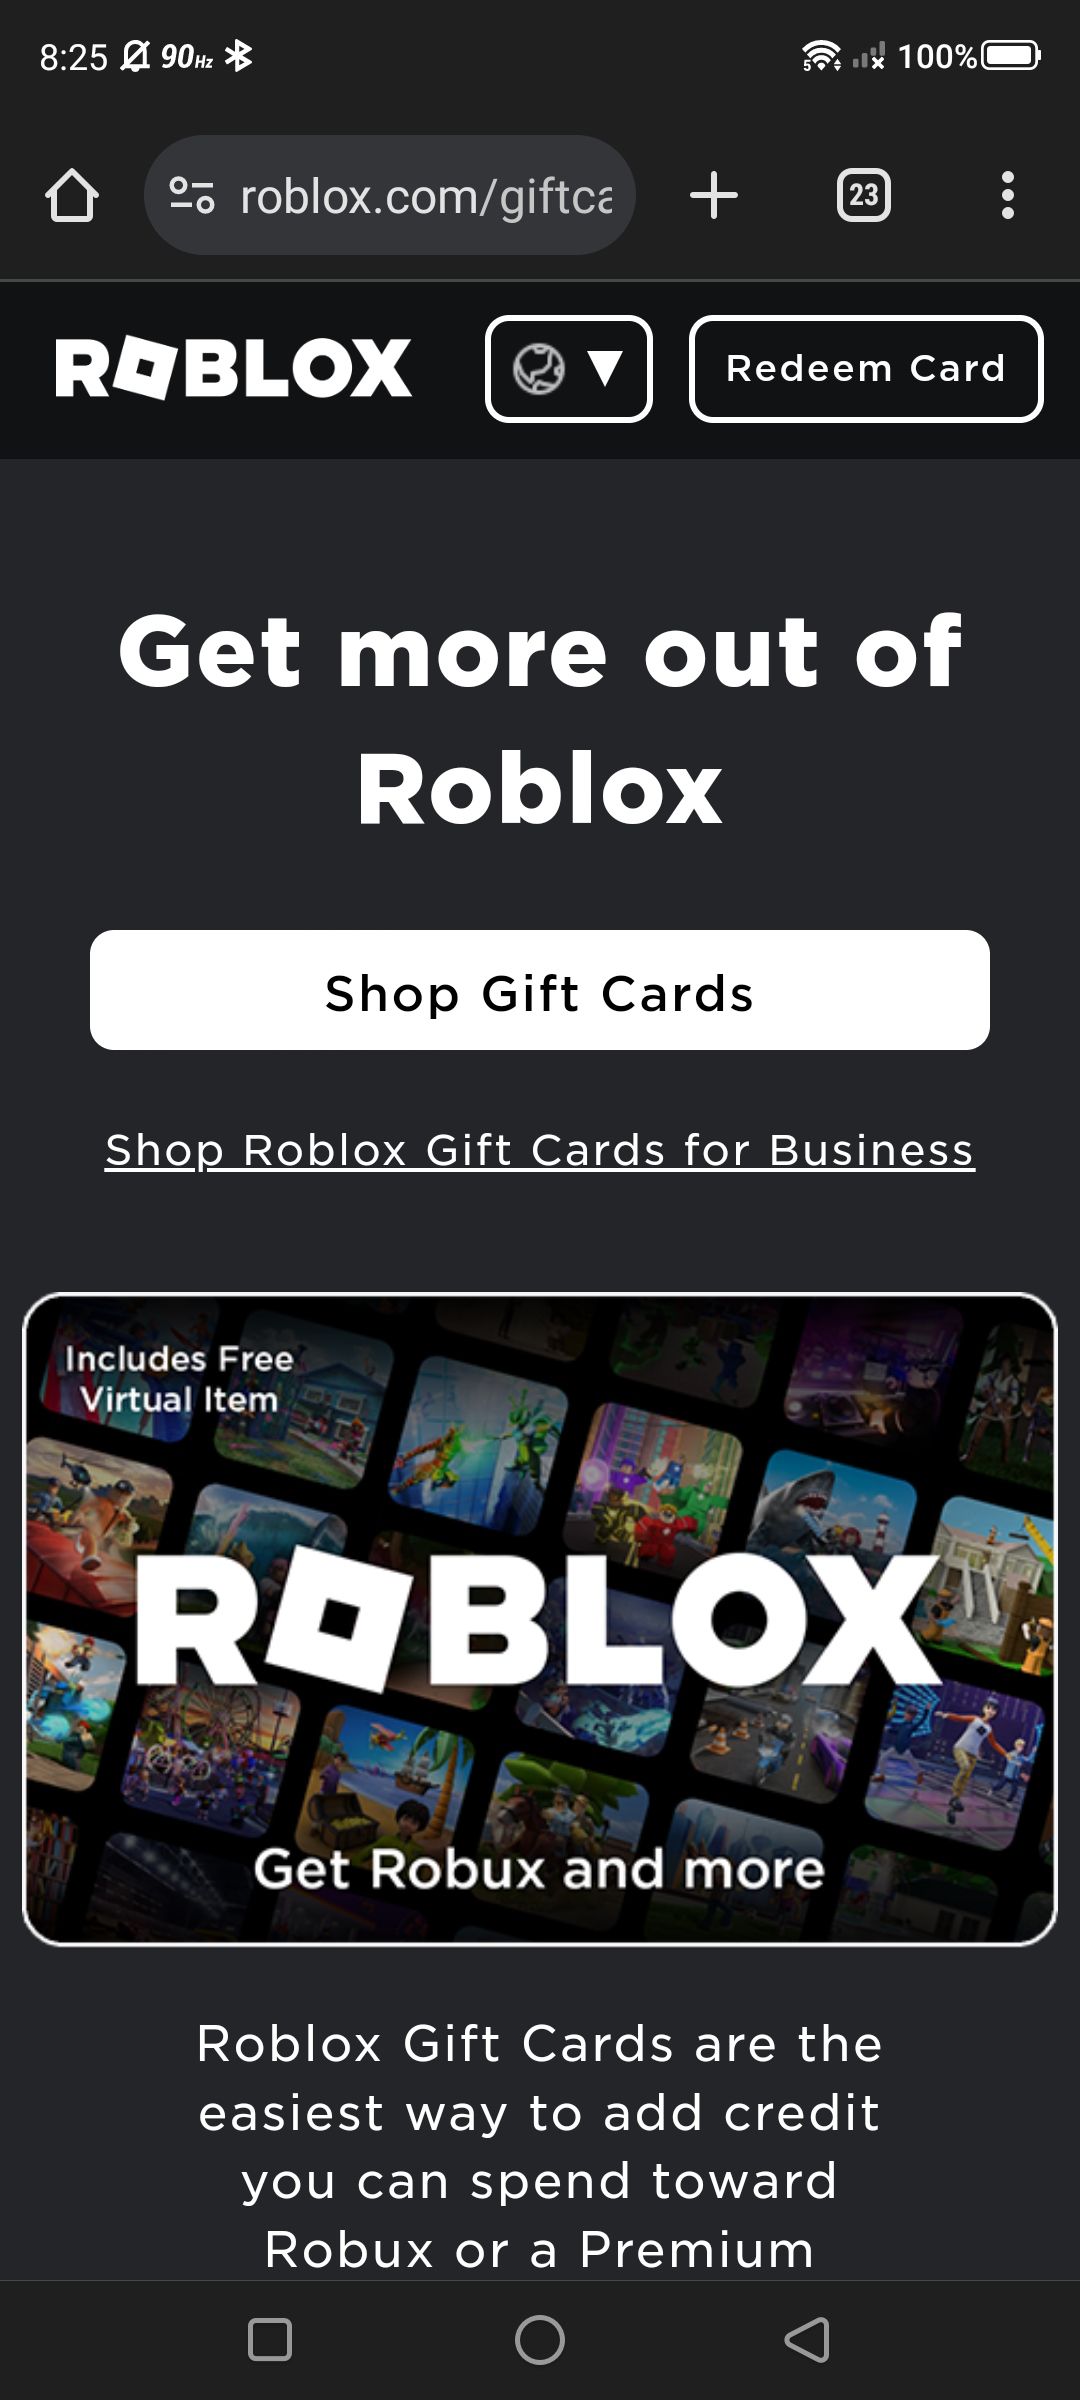 Roblox gift card page with redeem card option and shop for gift cards button